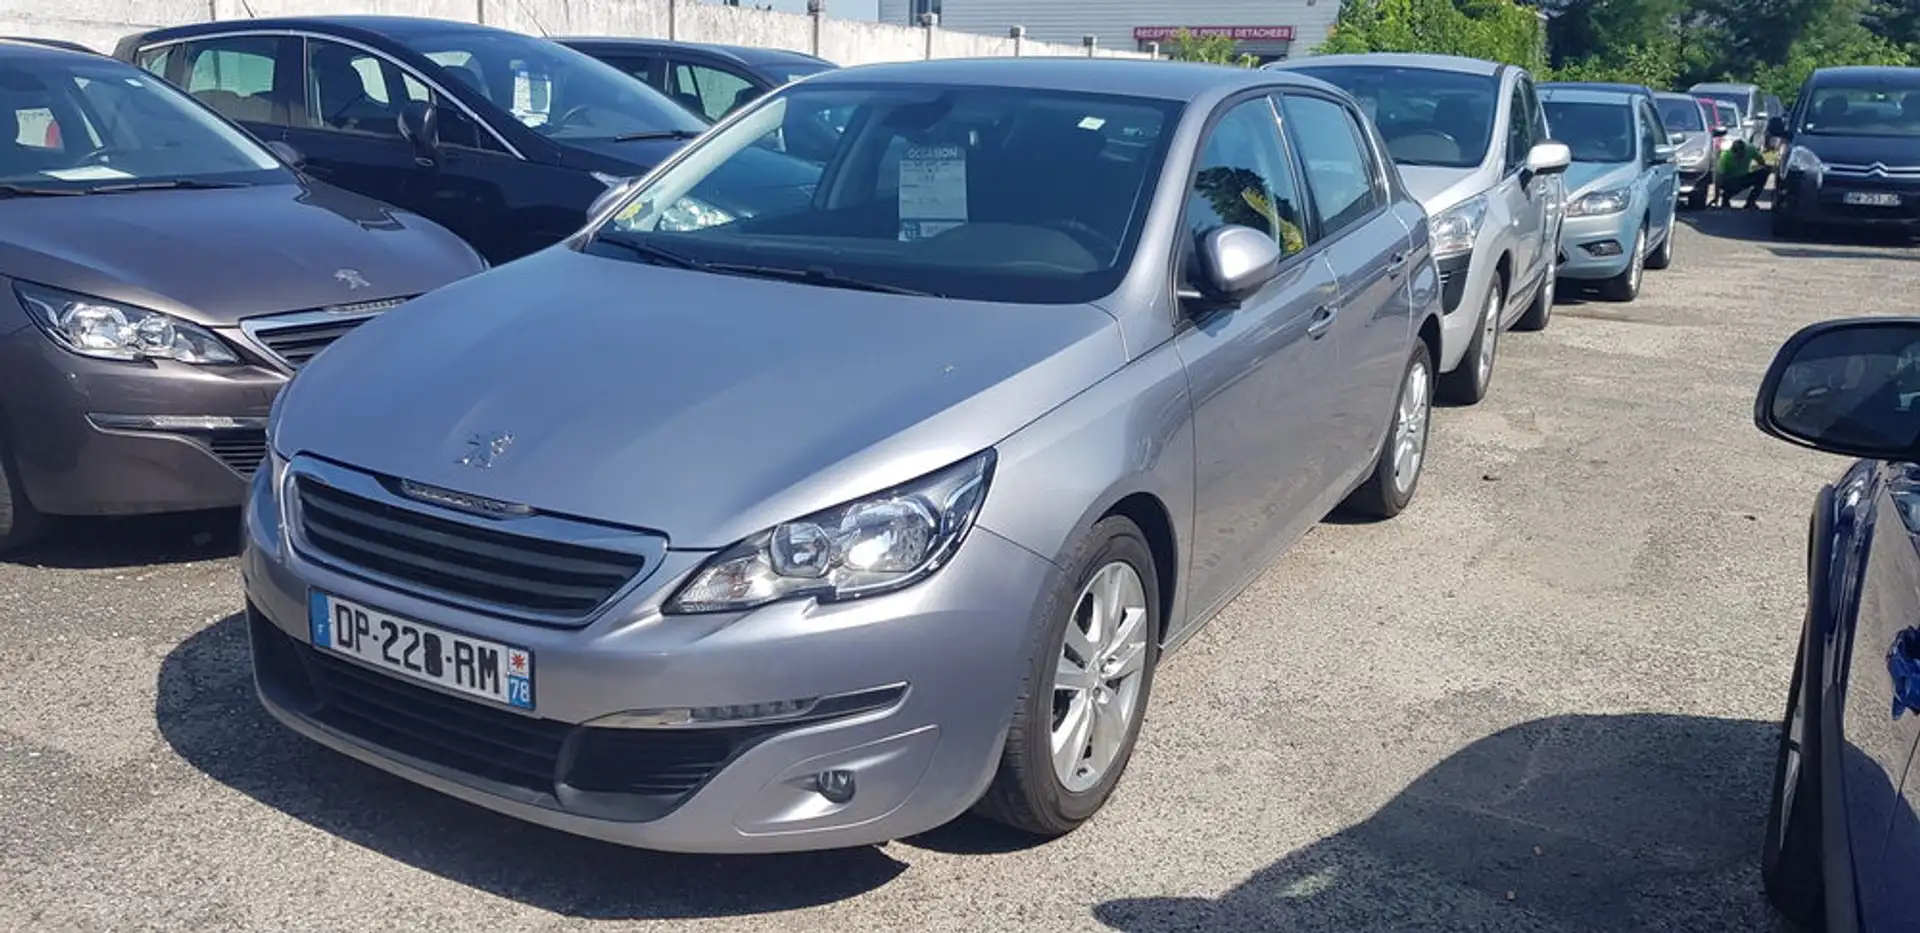 Peugeot 308 1.6 bluehdi 120ch s&s bvm6 business pack - 1